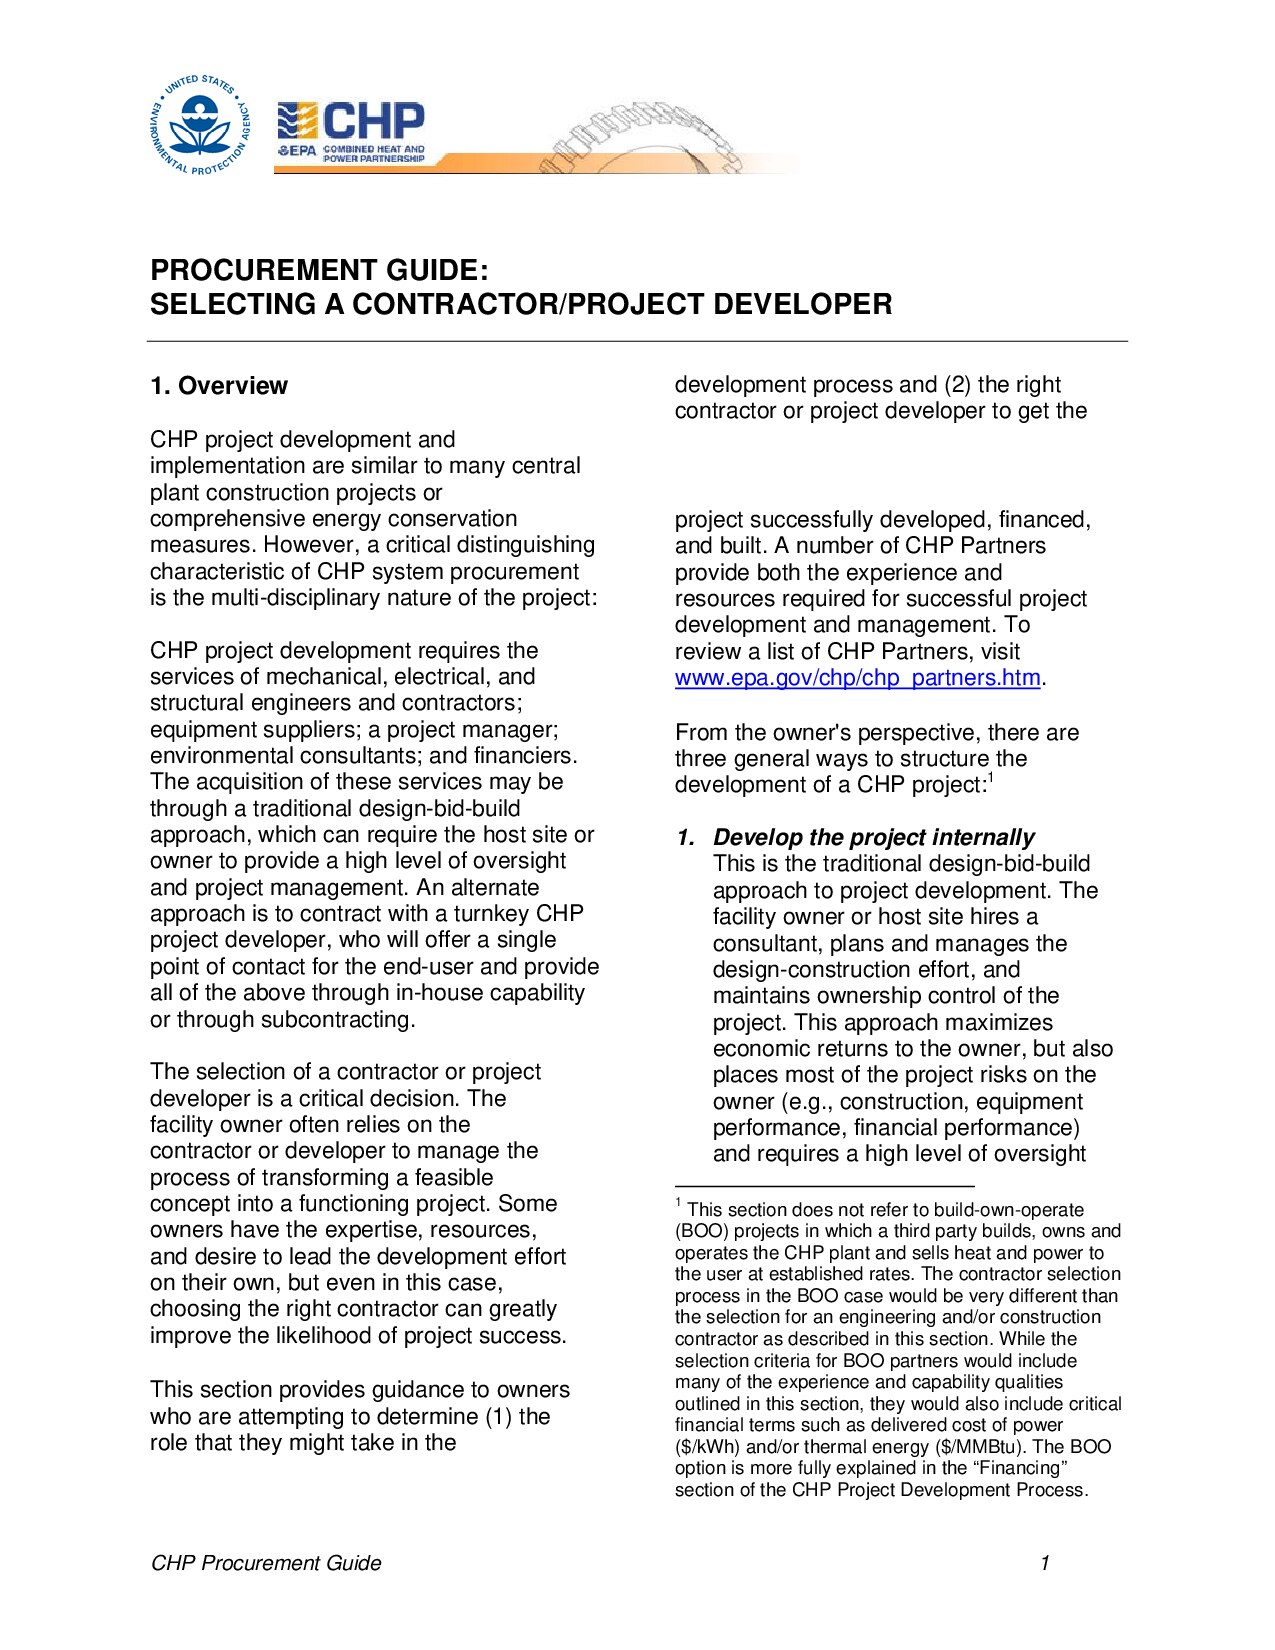 PROCUREMENT GUIDE: SELECTING A CONTRACTOR/PROJECT DEVELOPER